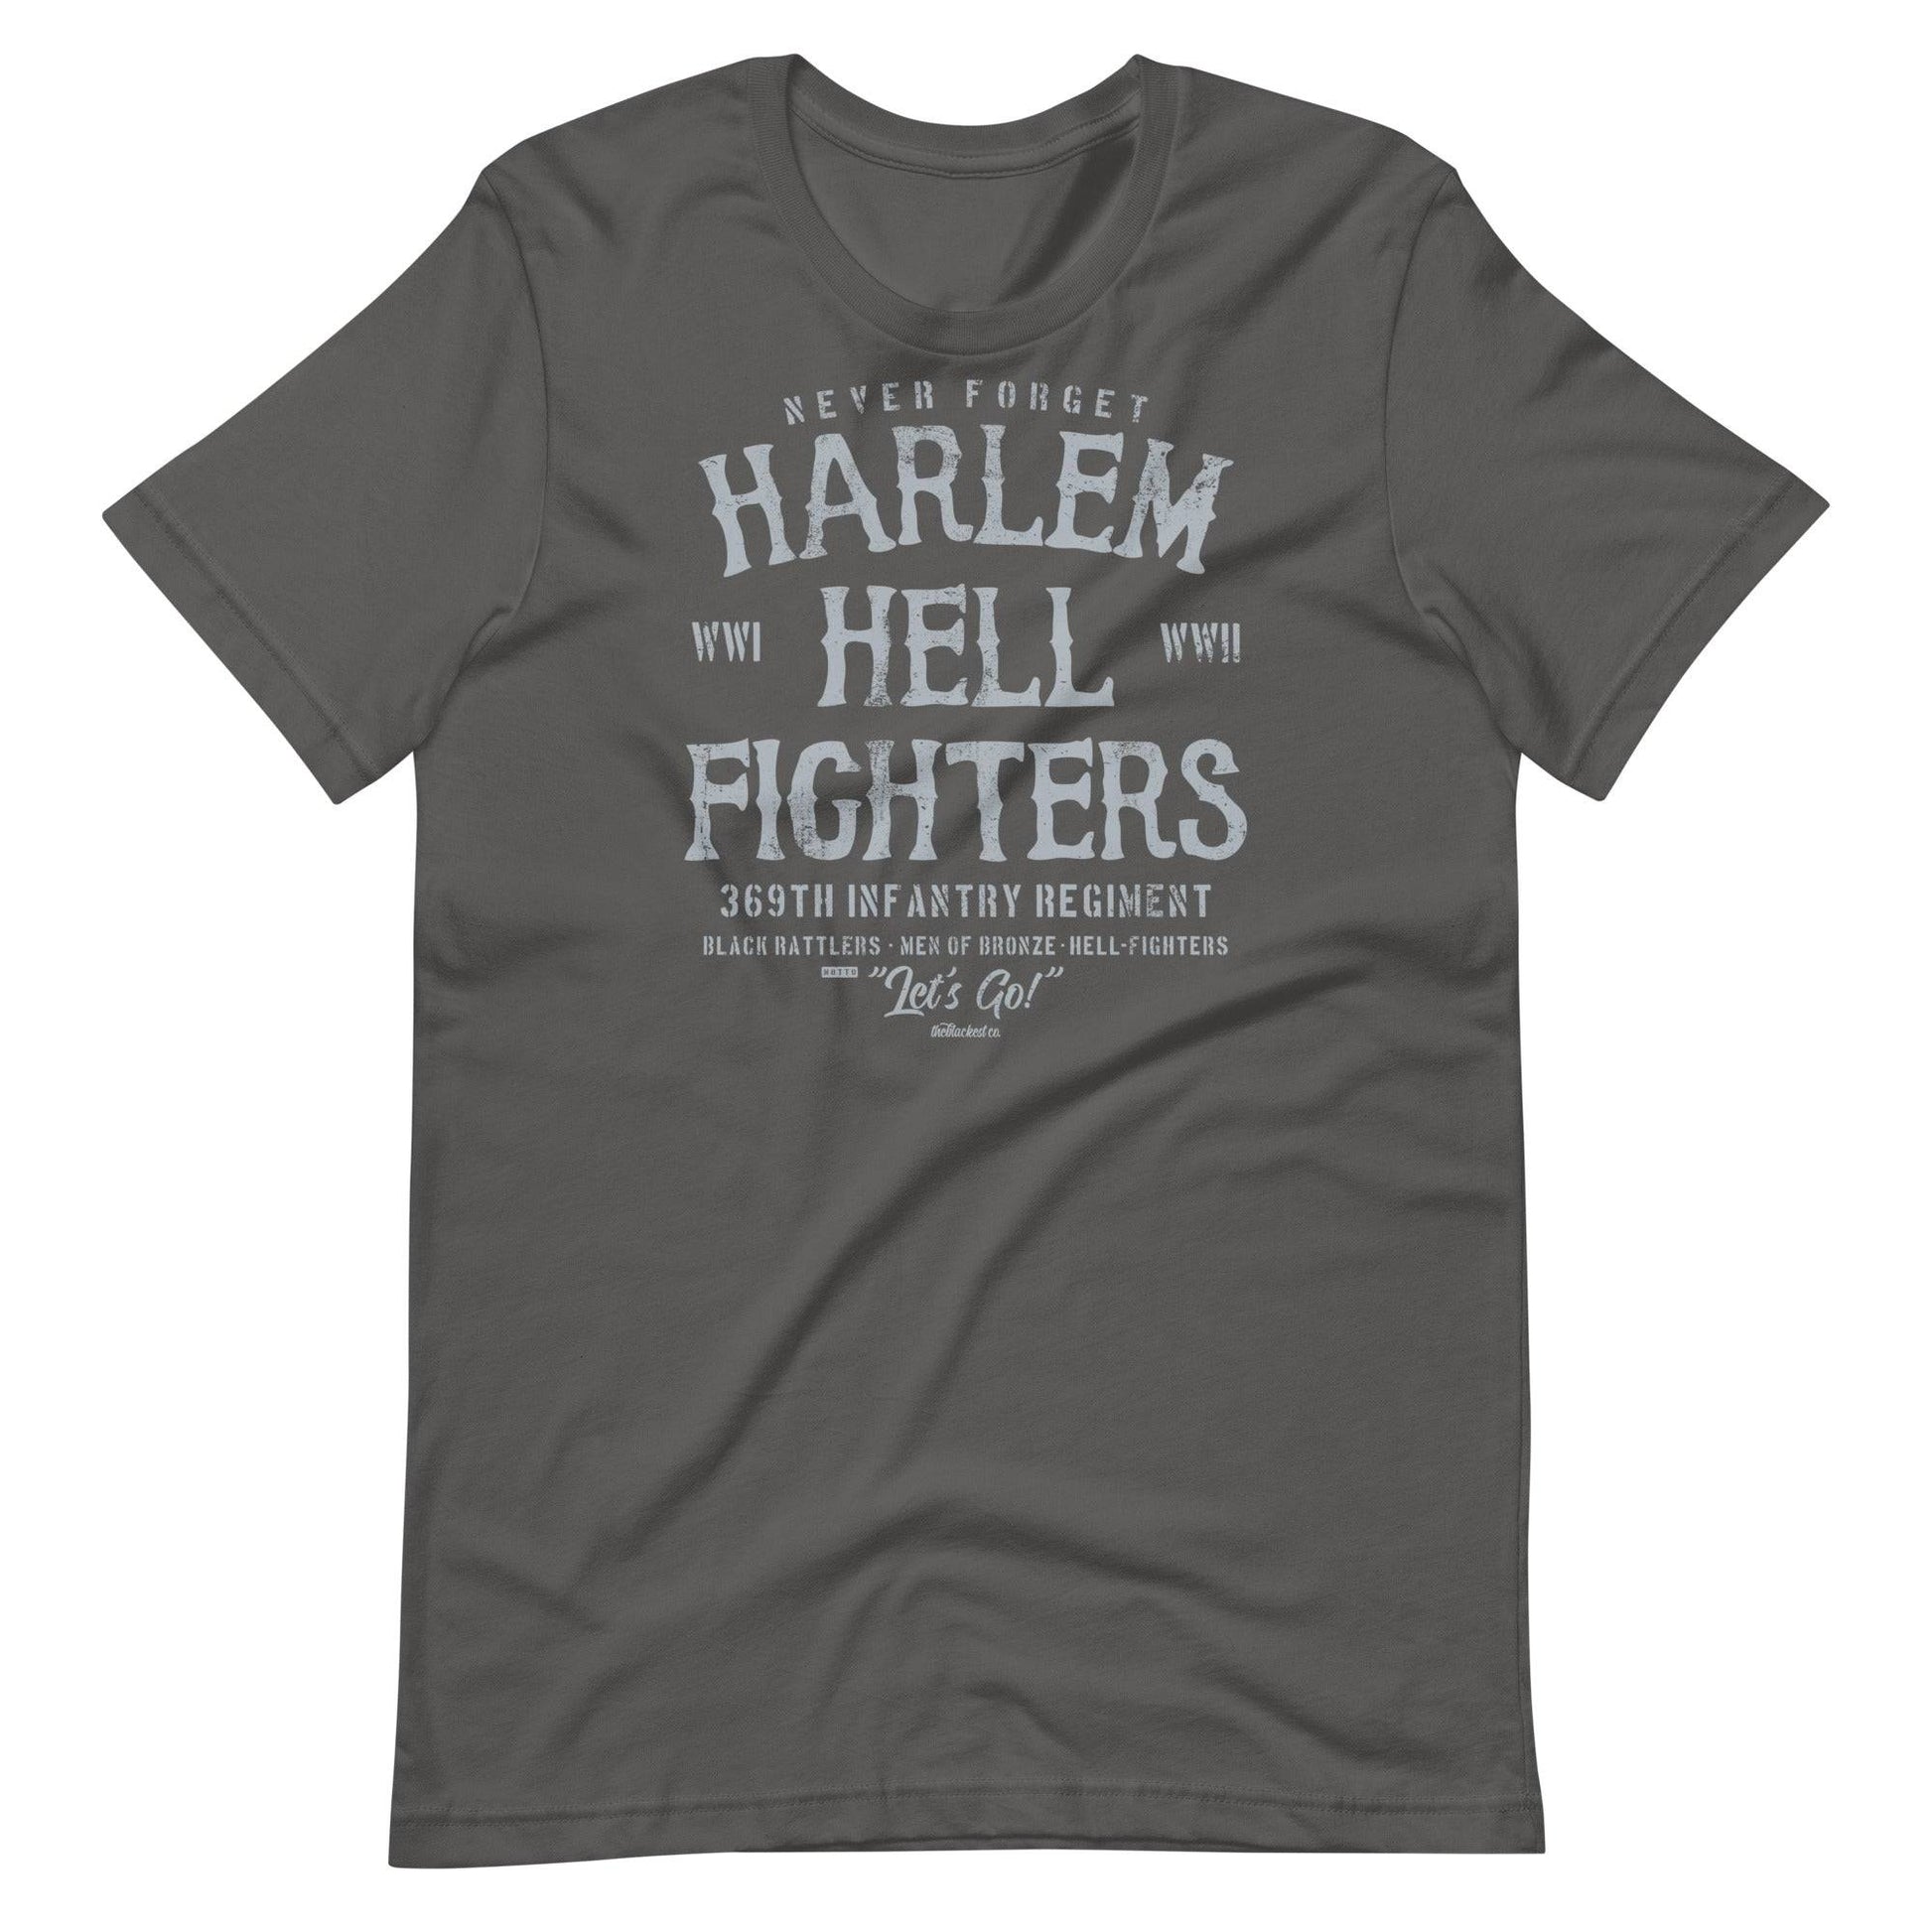 dark grey t shirt with white text that reads harlem hellfighters wwi and wwii